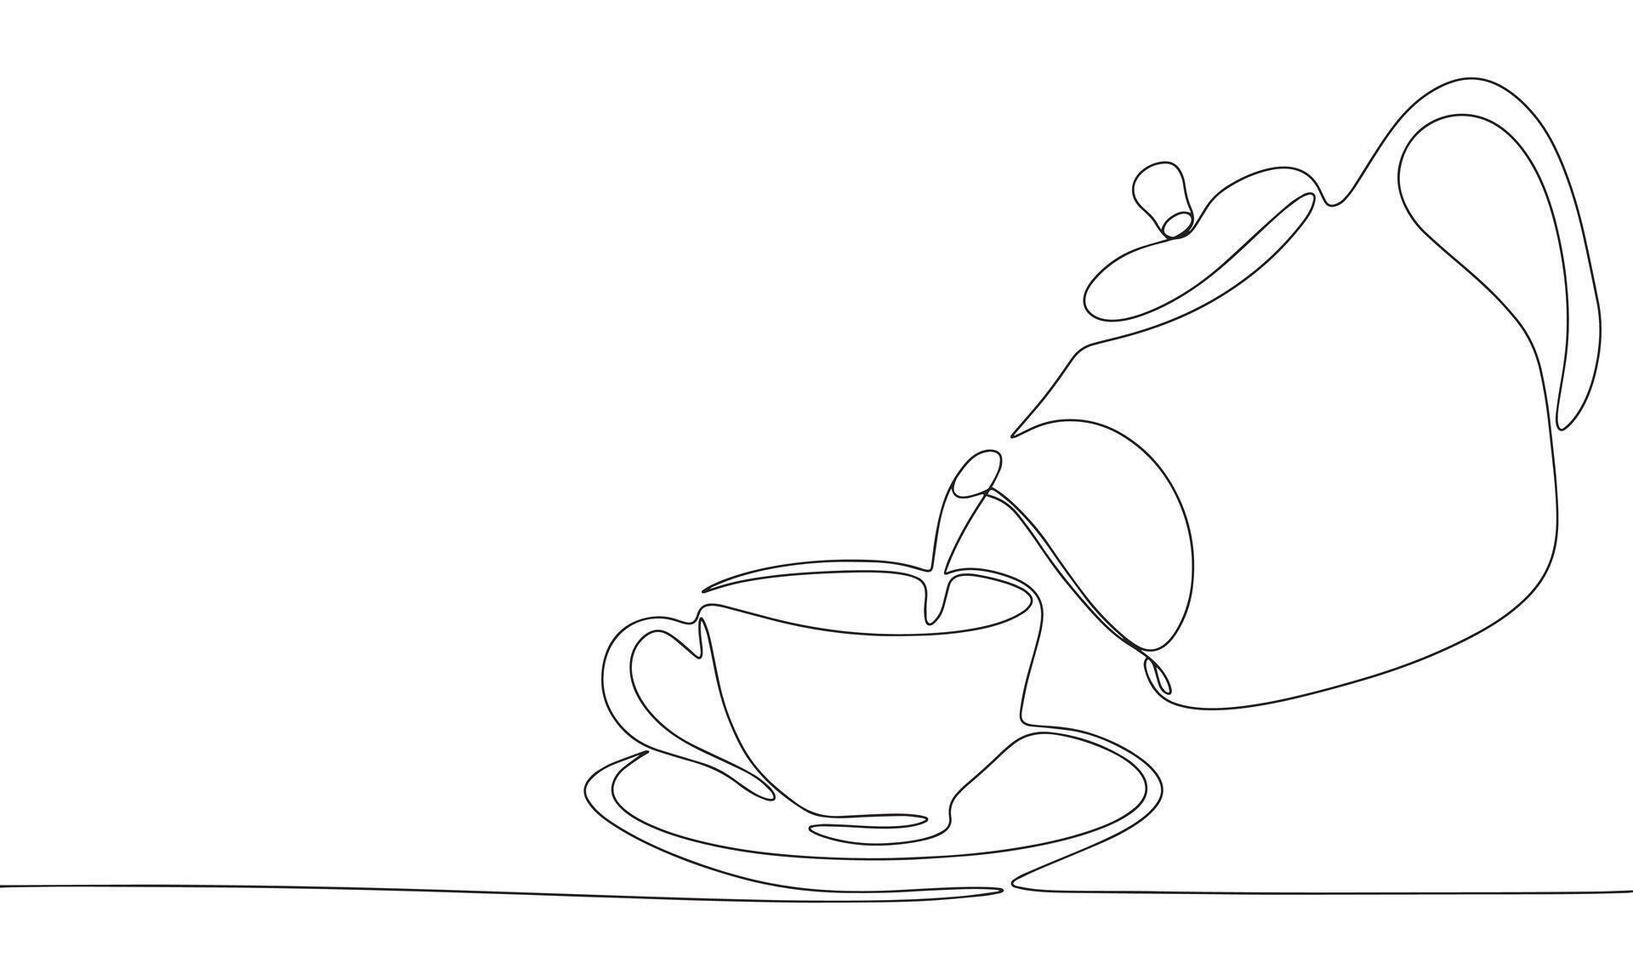 Kettle with cup one line continuous. Line art teapot and cup of tea. Hand drawn art. vector